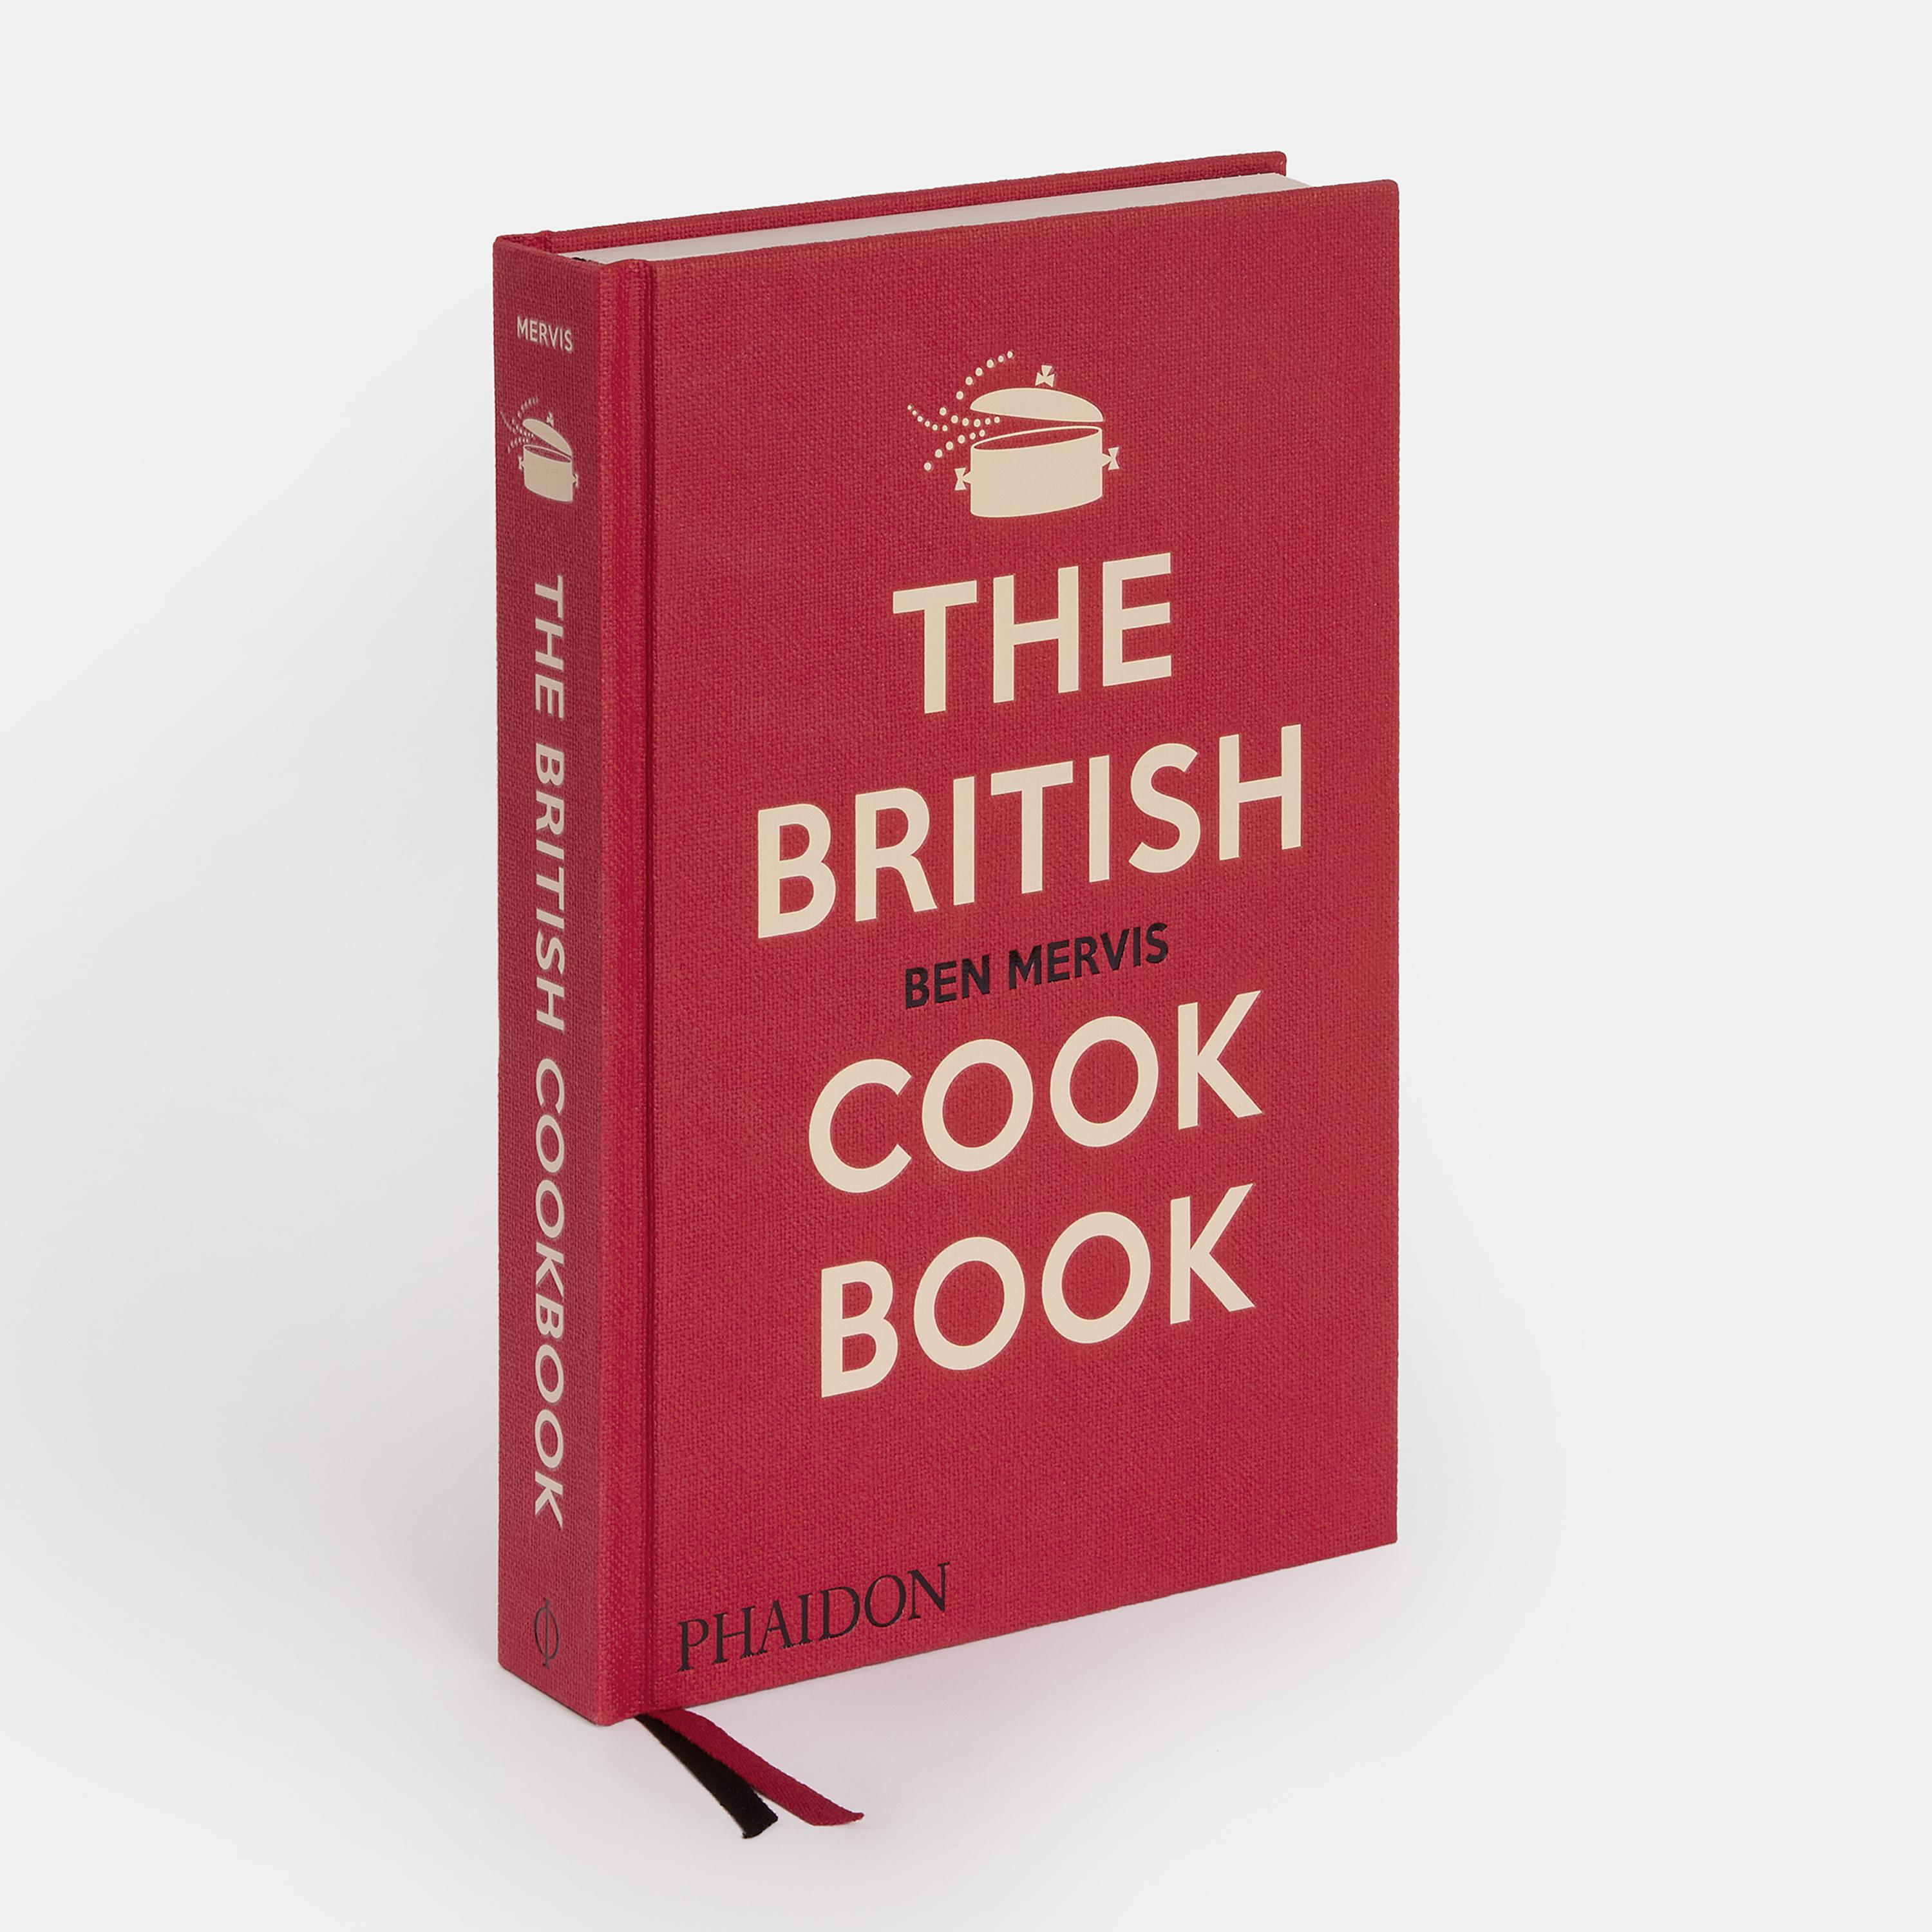 Discover over 550 much-loved recipes celebrating the rich traditions of regional and seasonal British cooking.

In The British Cookbook, author and food historian Ben Mervis takes readers on a mouth-watering culinary tour across England, Wales,